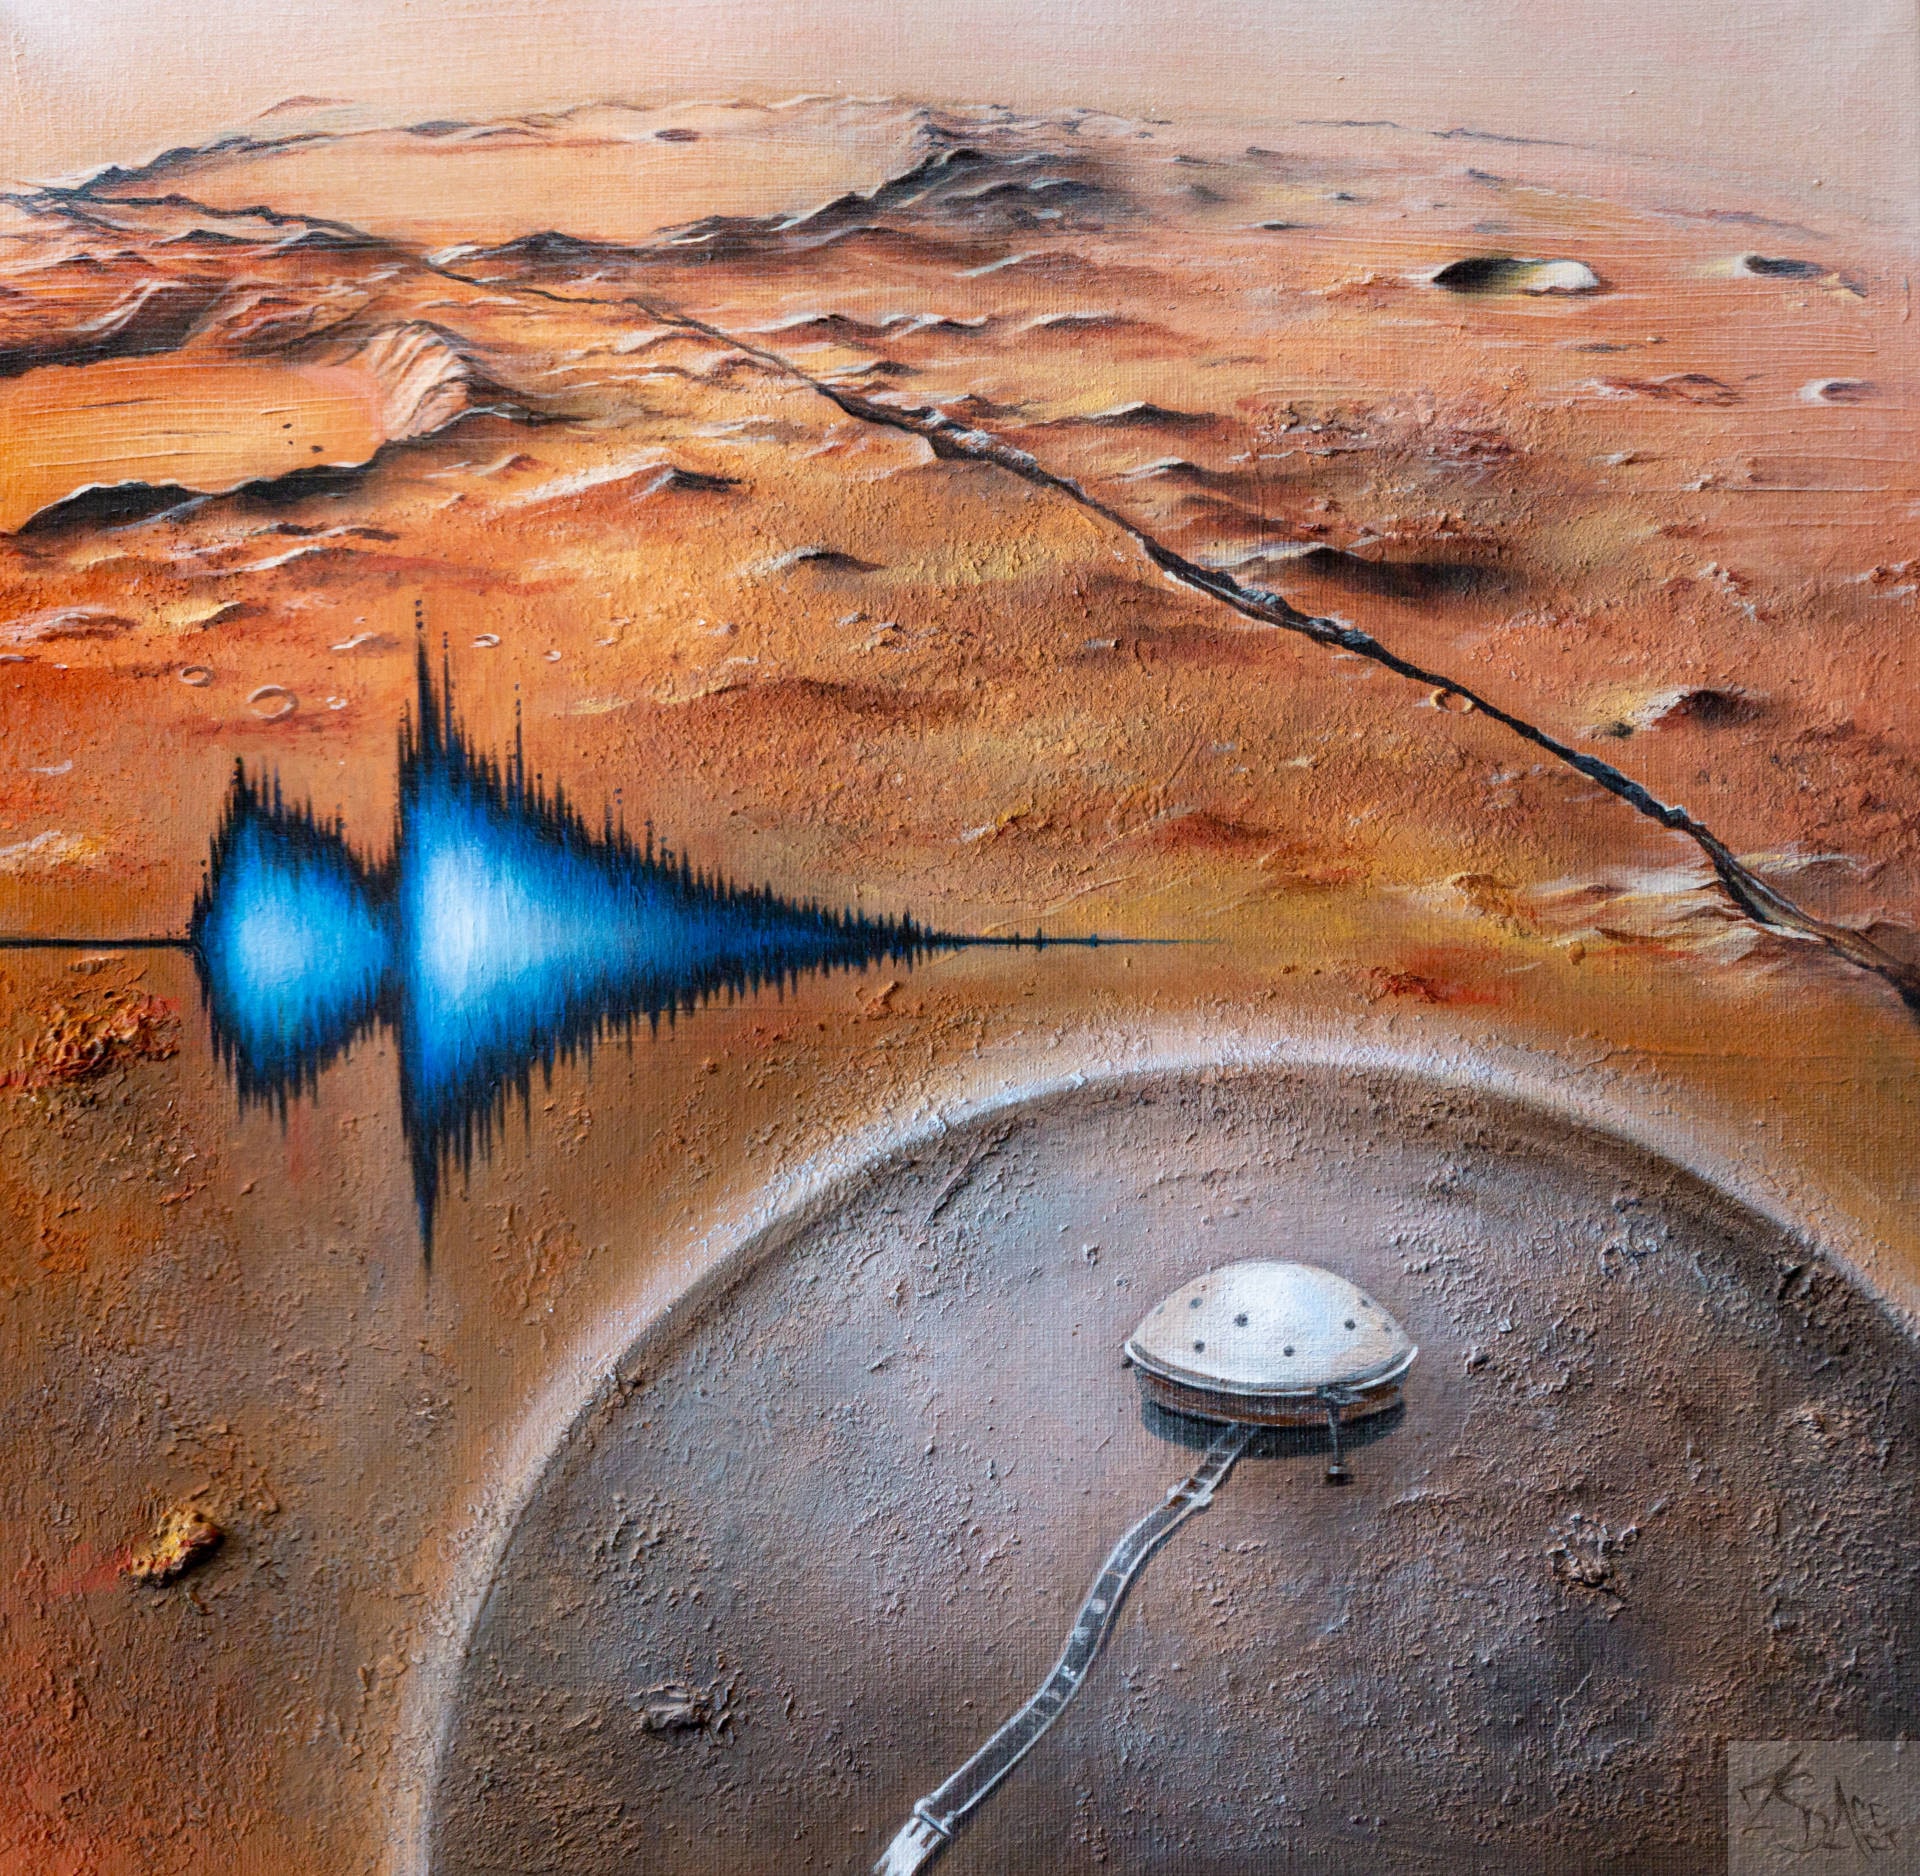 The strongest quake on Mars measured by the InSight spacecraft.